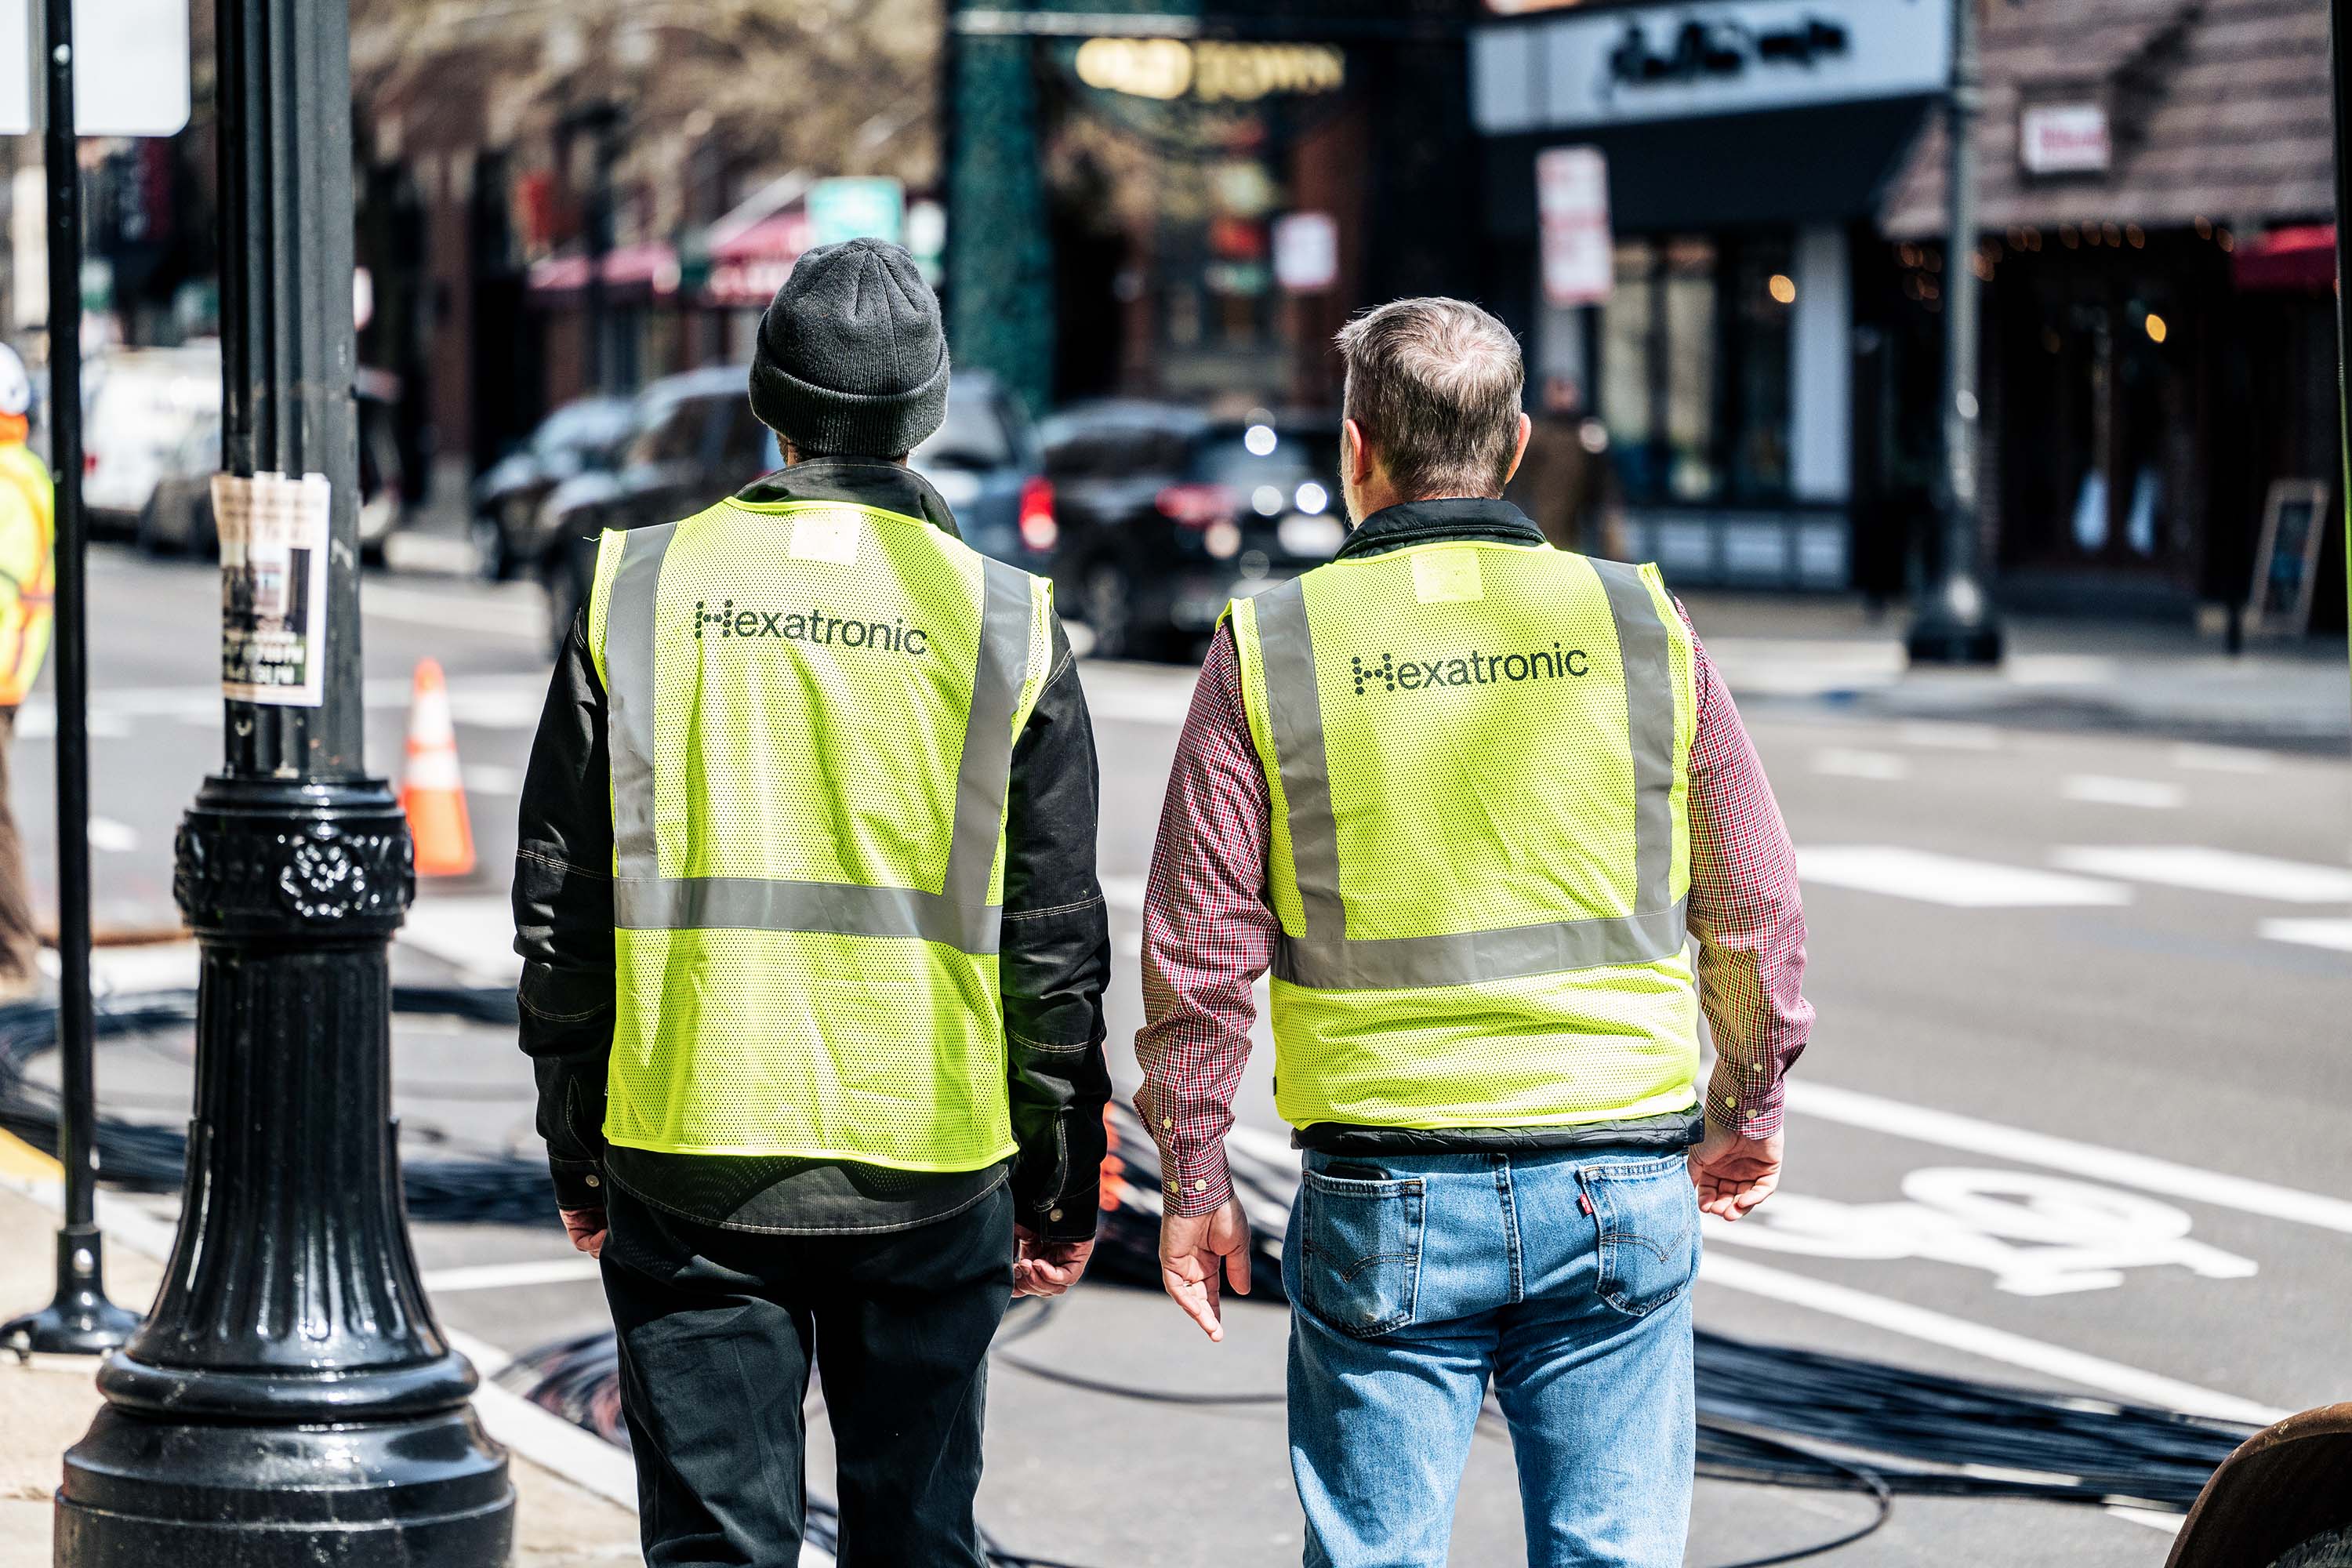 Two people in yellow vests with 